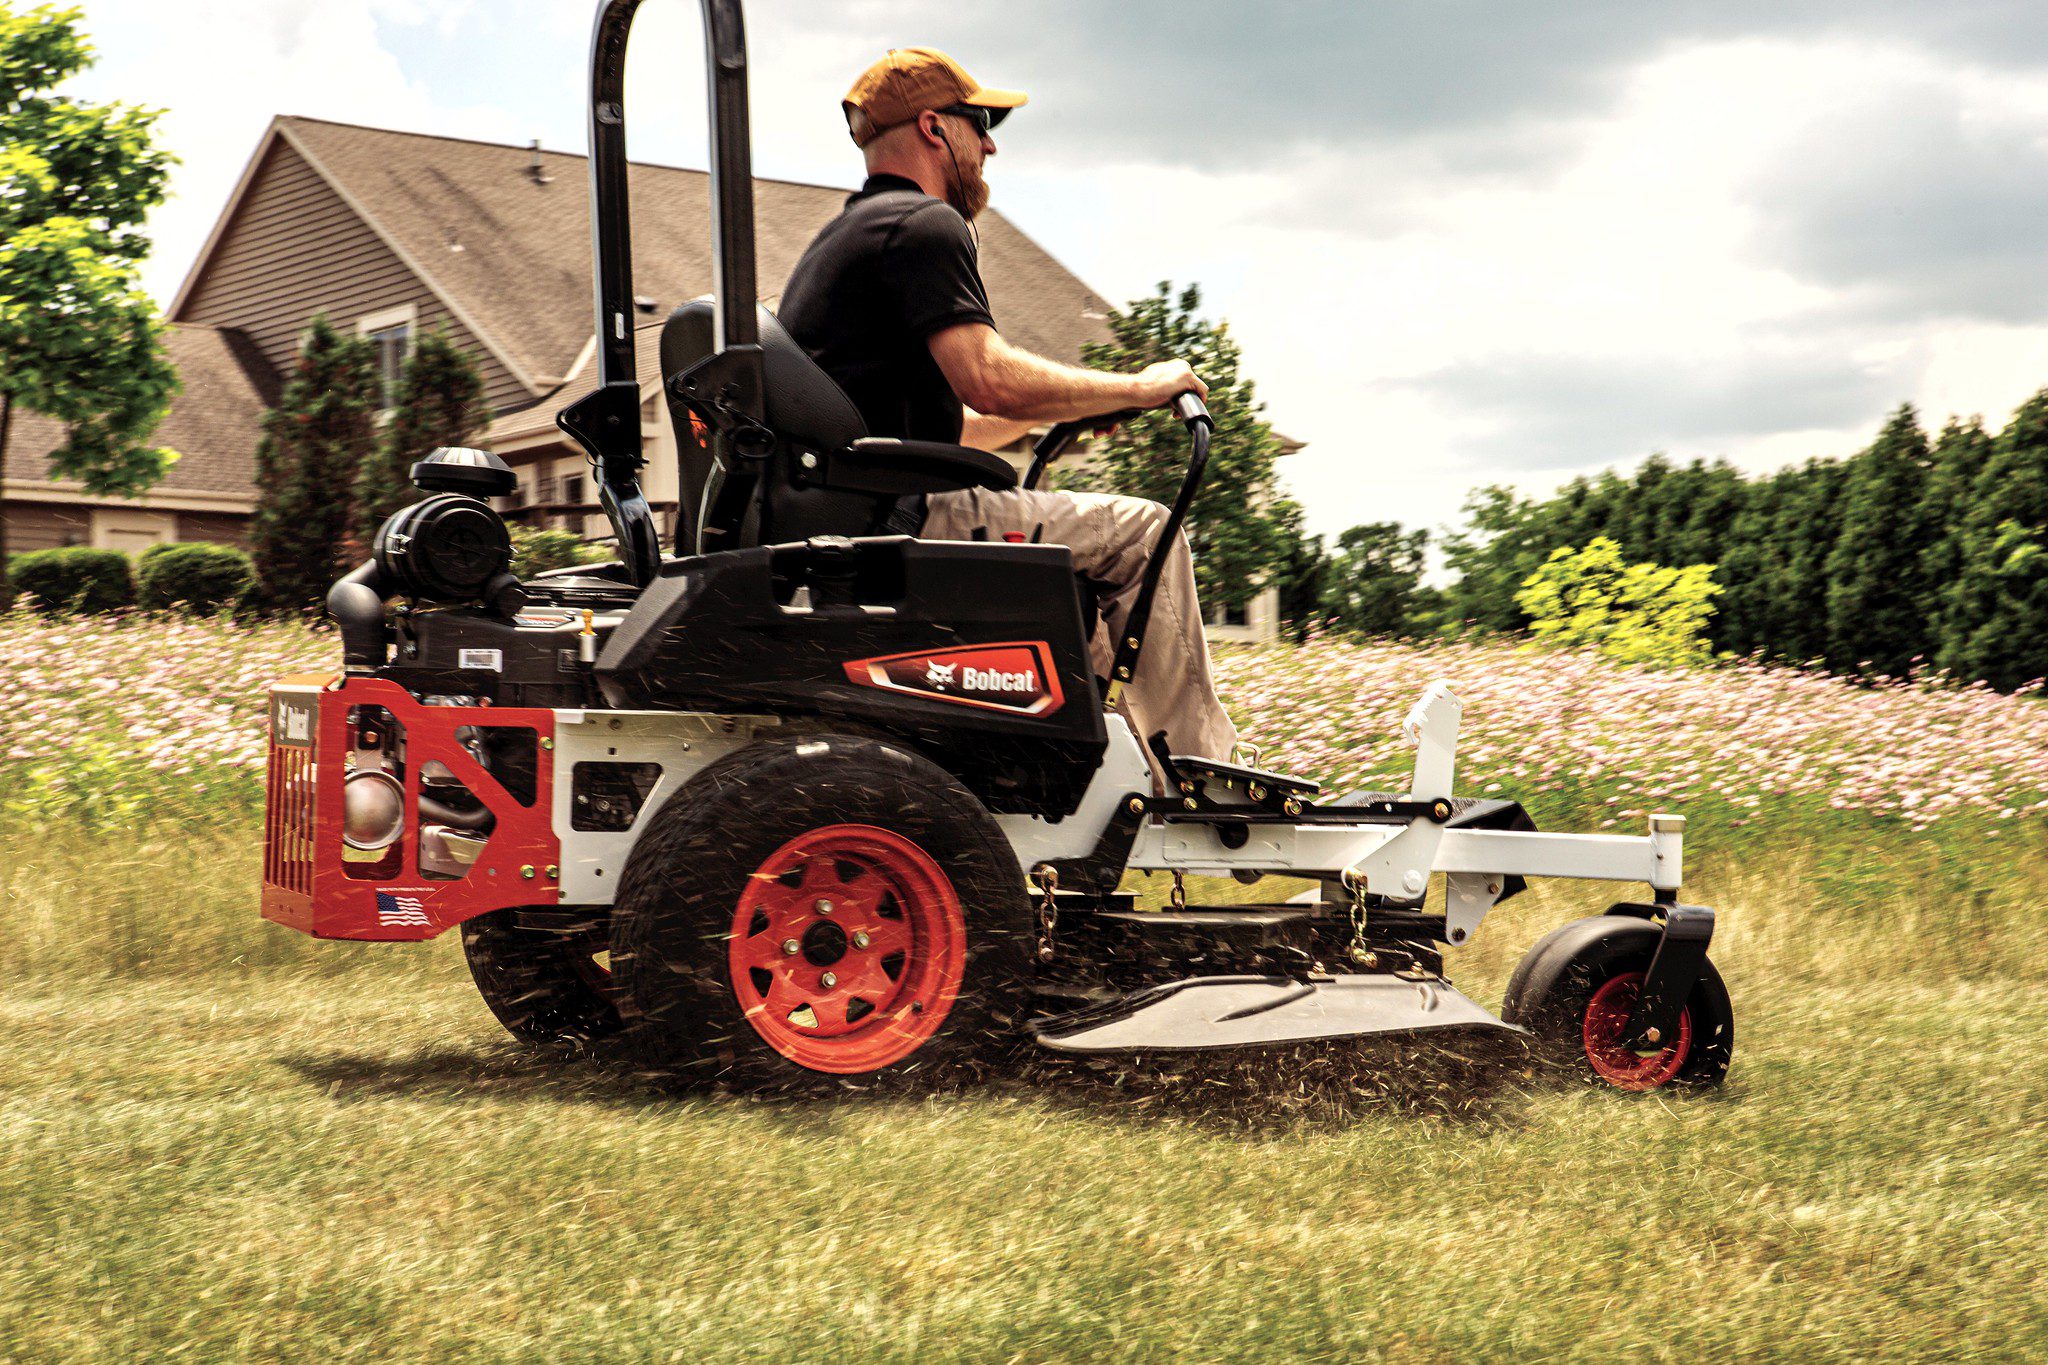 Browse Specs and more for the ZT3500 Zero-Turn Mower 52″ - Bobcat of Atlanta